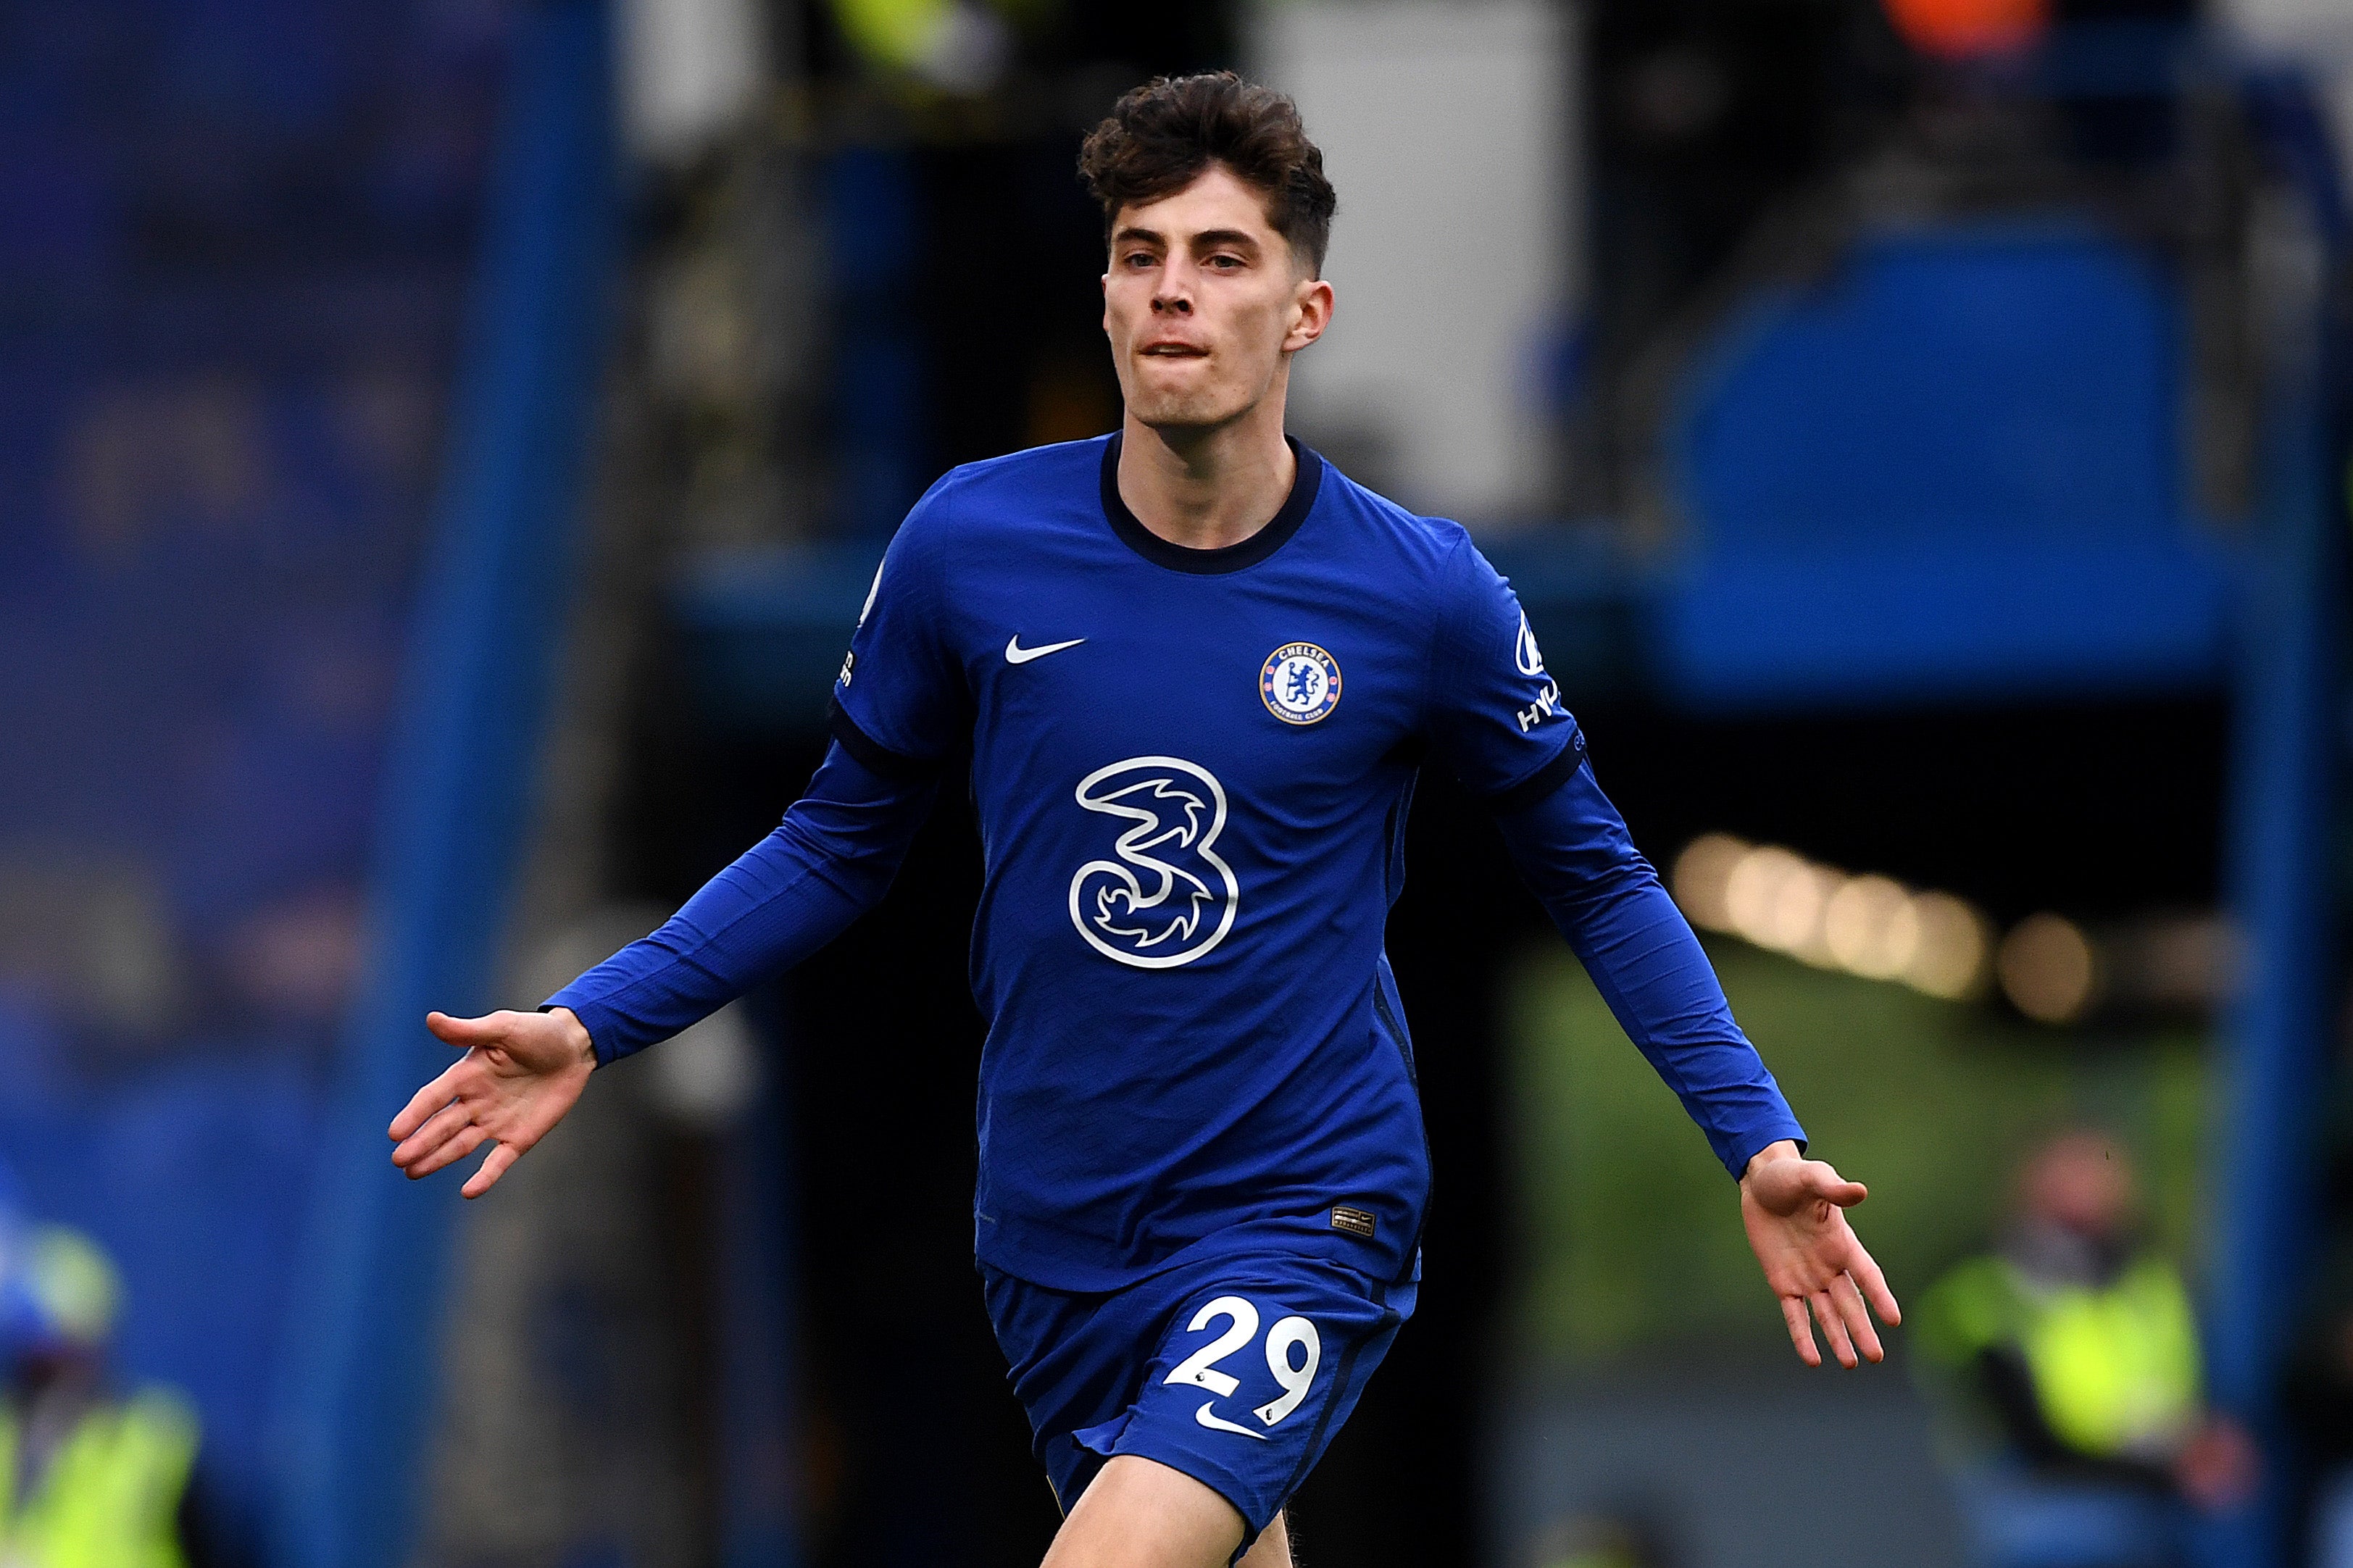 Kai Havertz’s two goals against Fulham took him to double figures in his first season at Stamford Bridge